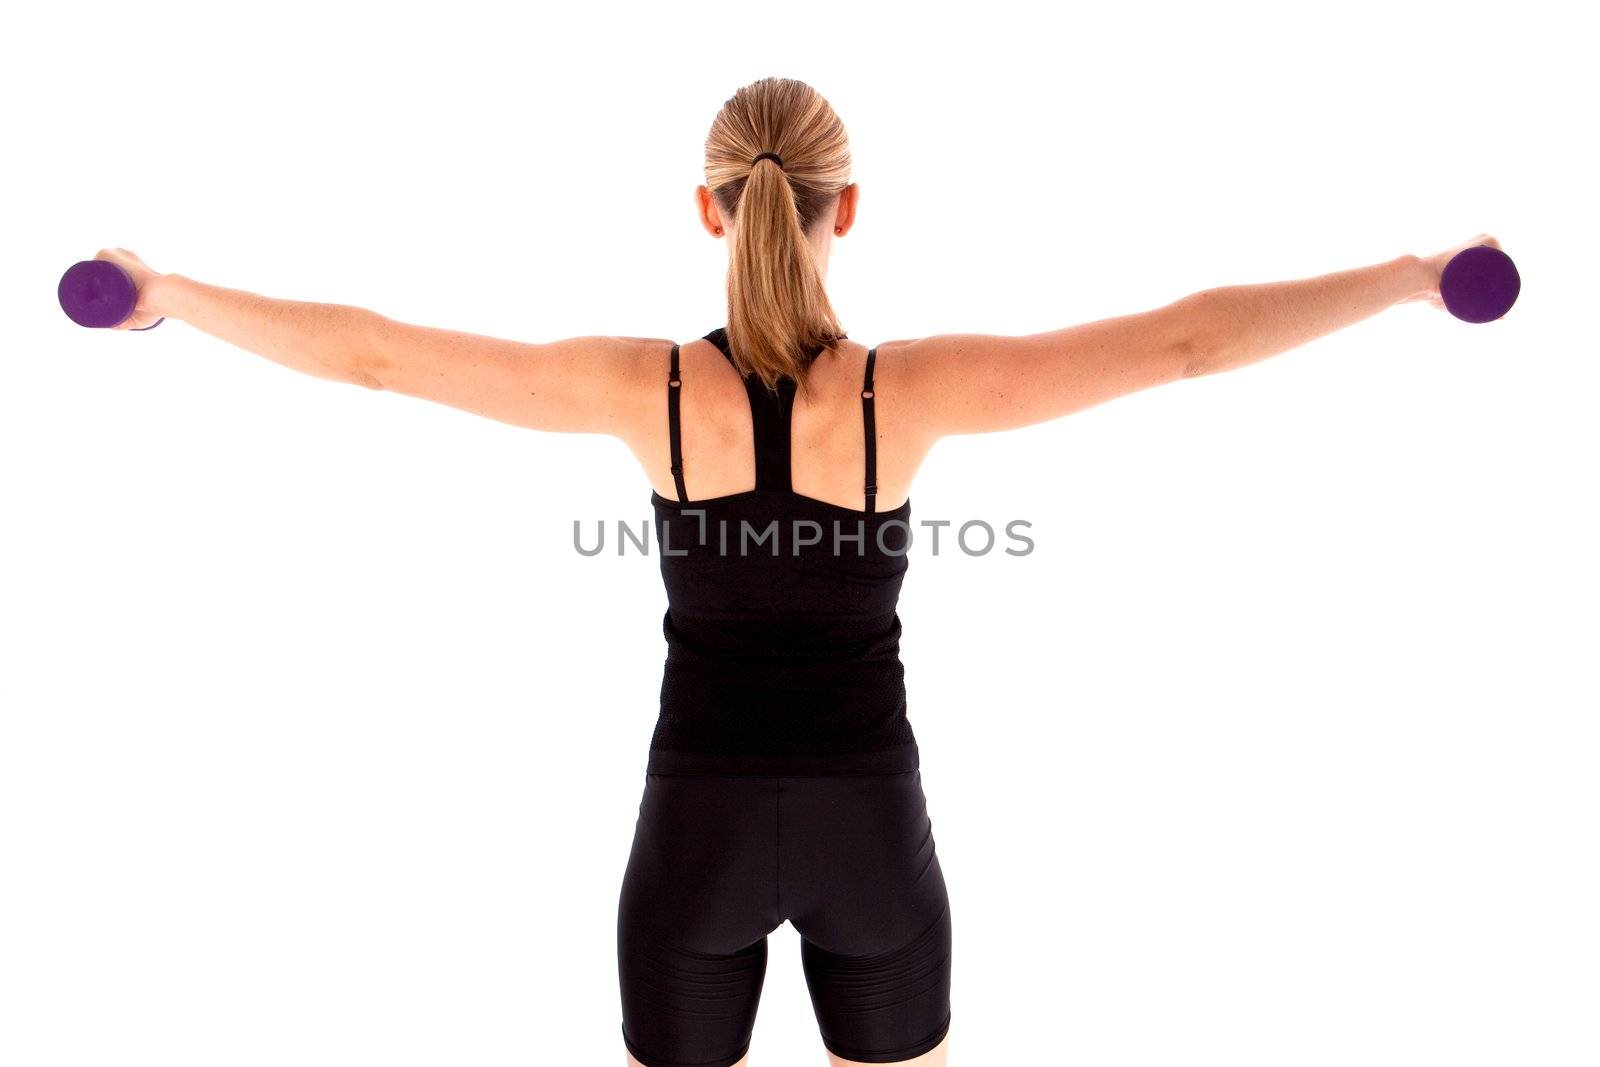 Lady doing dumbell exercises isolated